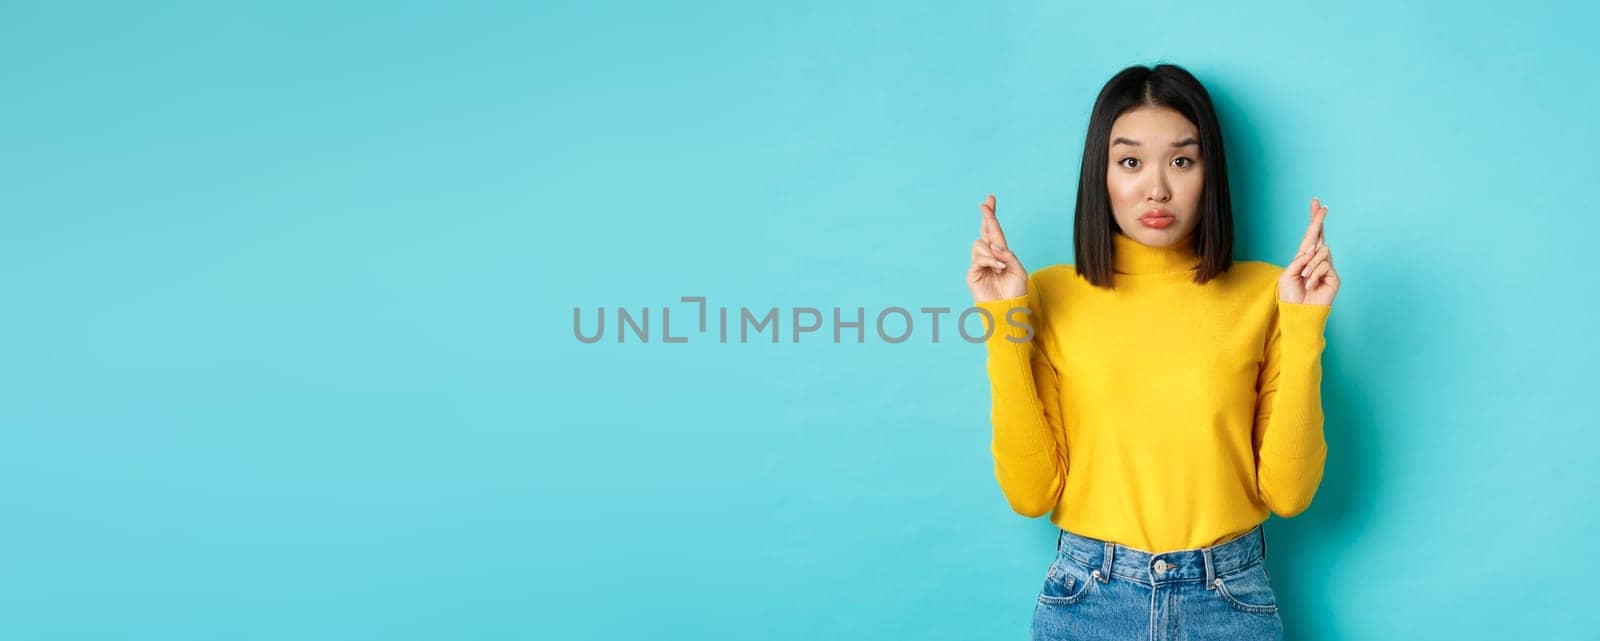 Silly hopeful asian girl making wish, pucker lips and looking at camera with dreamy glance, cross fingers for good luck, standing over blue background.